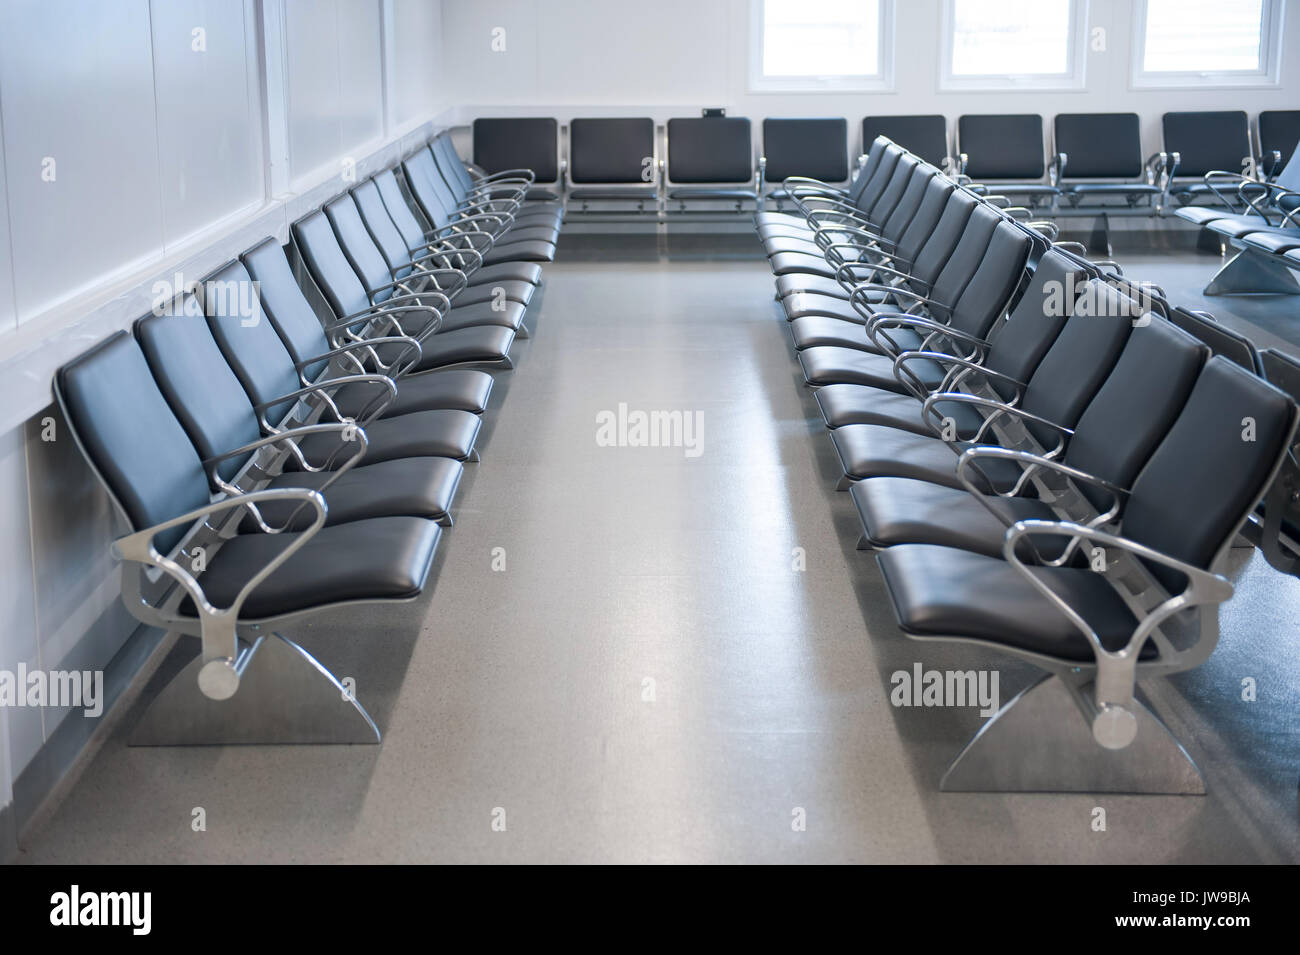 waiting room with black leather seating Stock Photo